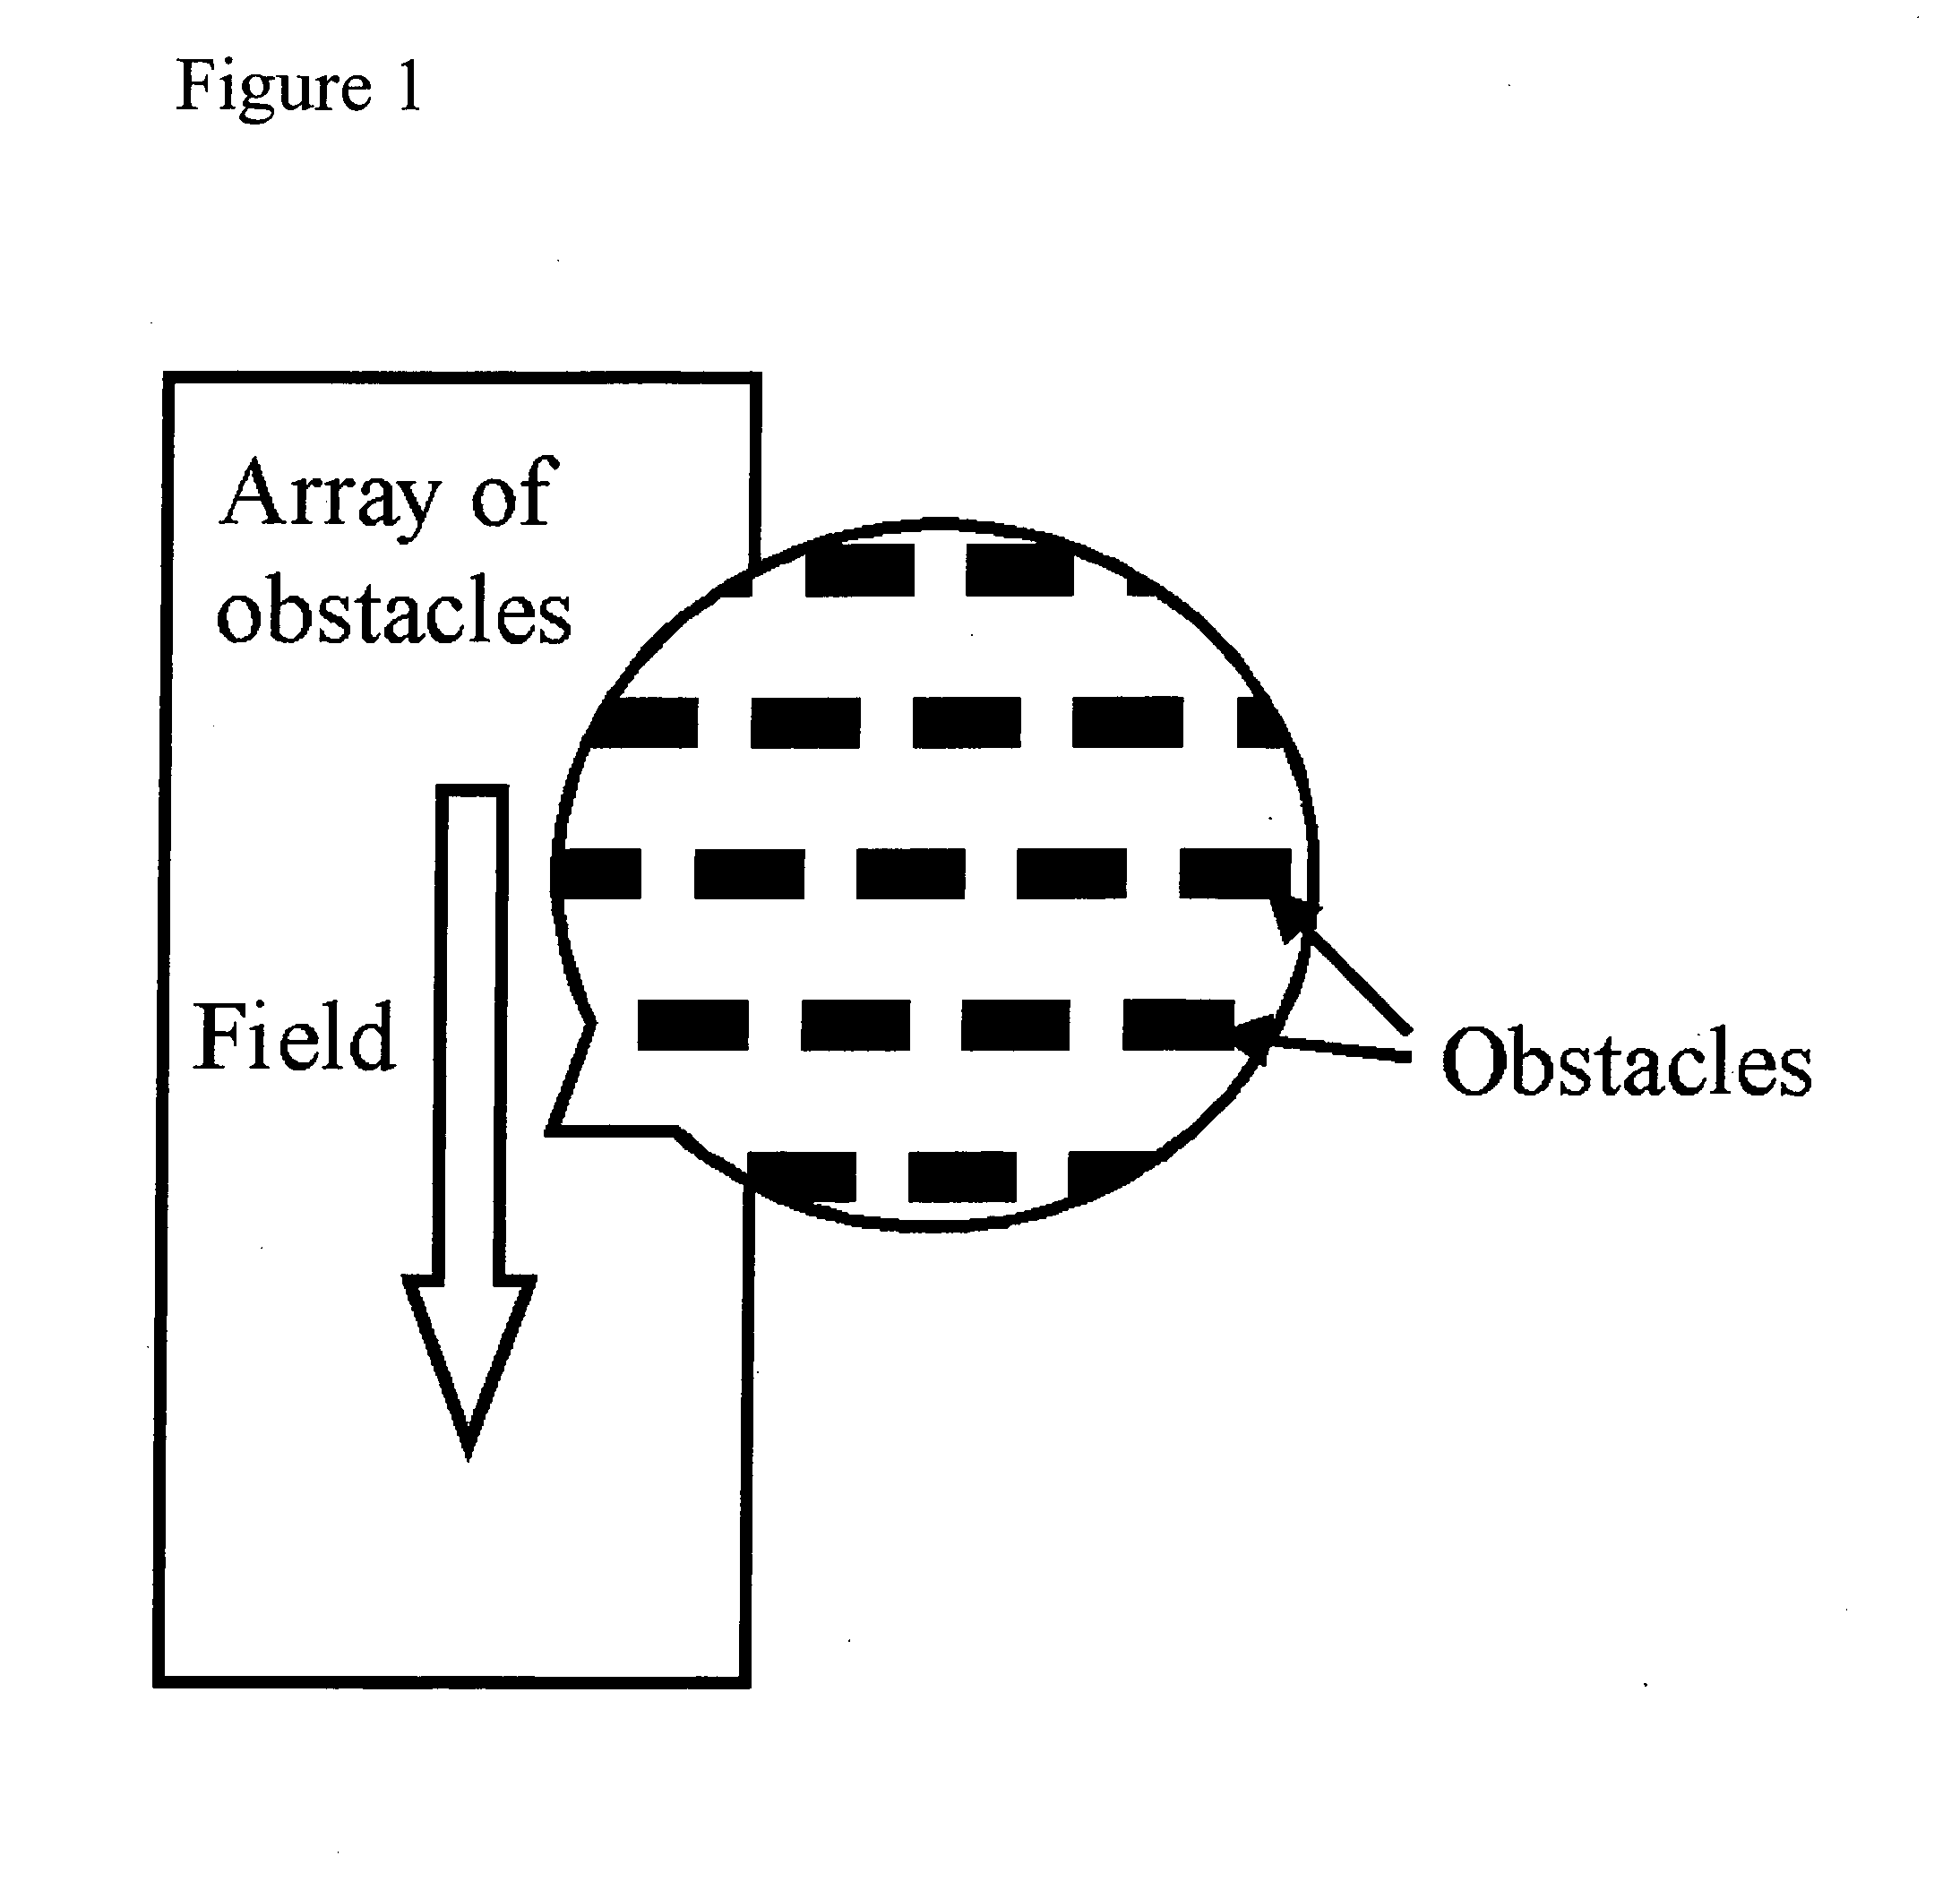 Method for continuous particle separation using obstacle arrays asymmetrically aligned to fields